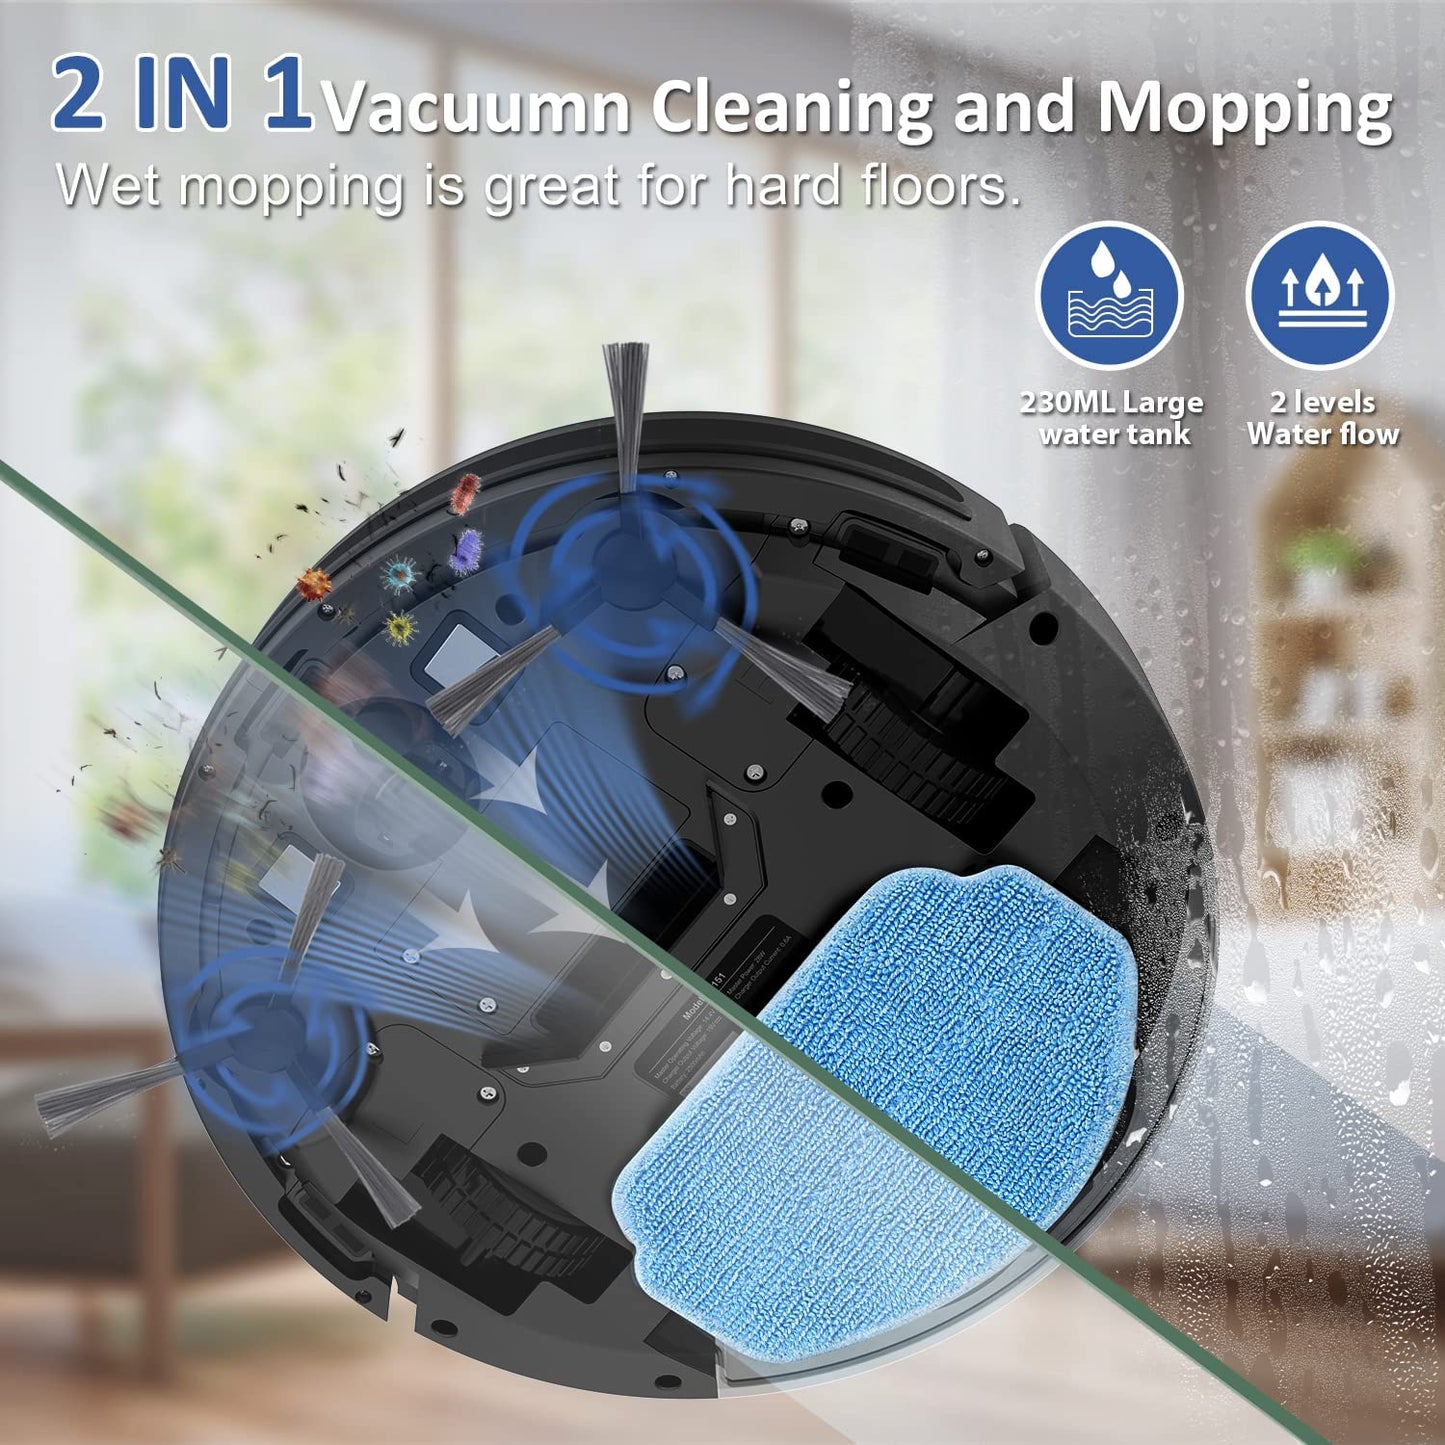 Robot Vaccum and Mop Combo, 2 in 1 Vacuum Cleaning Robot